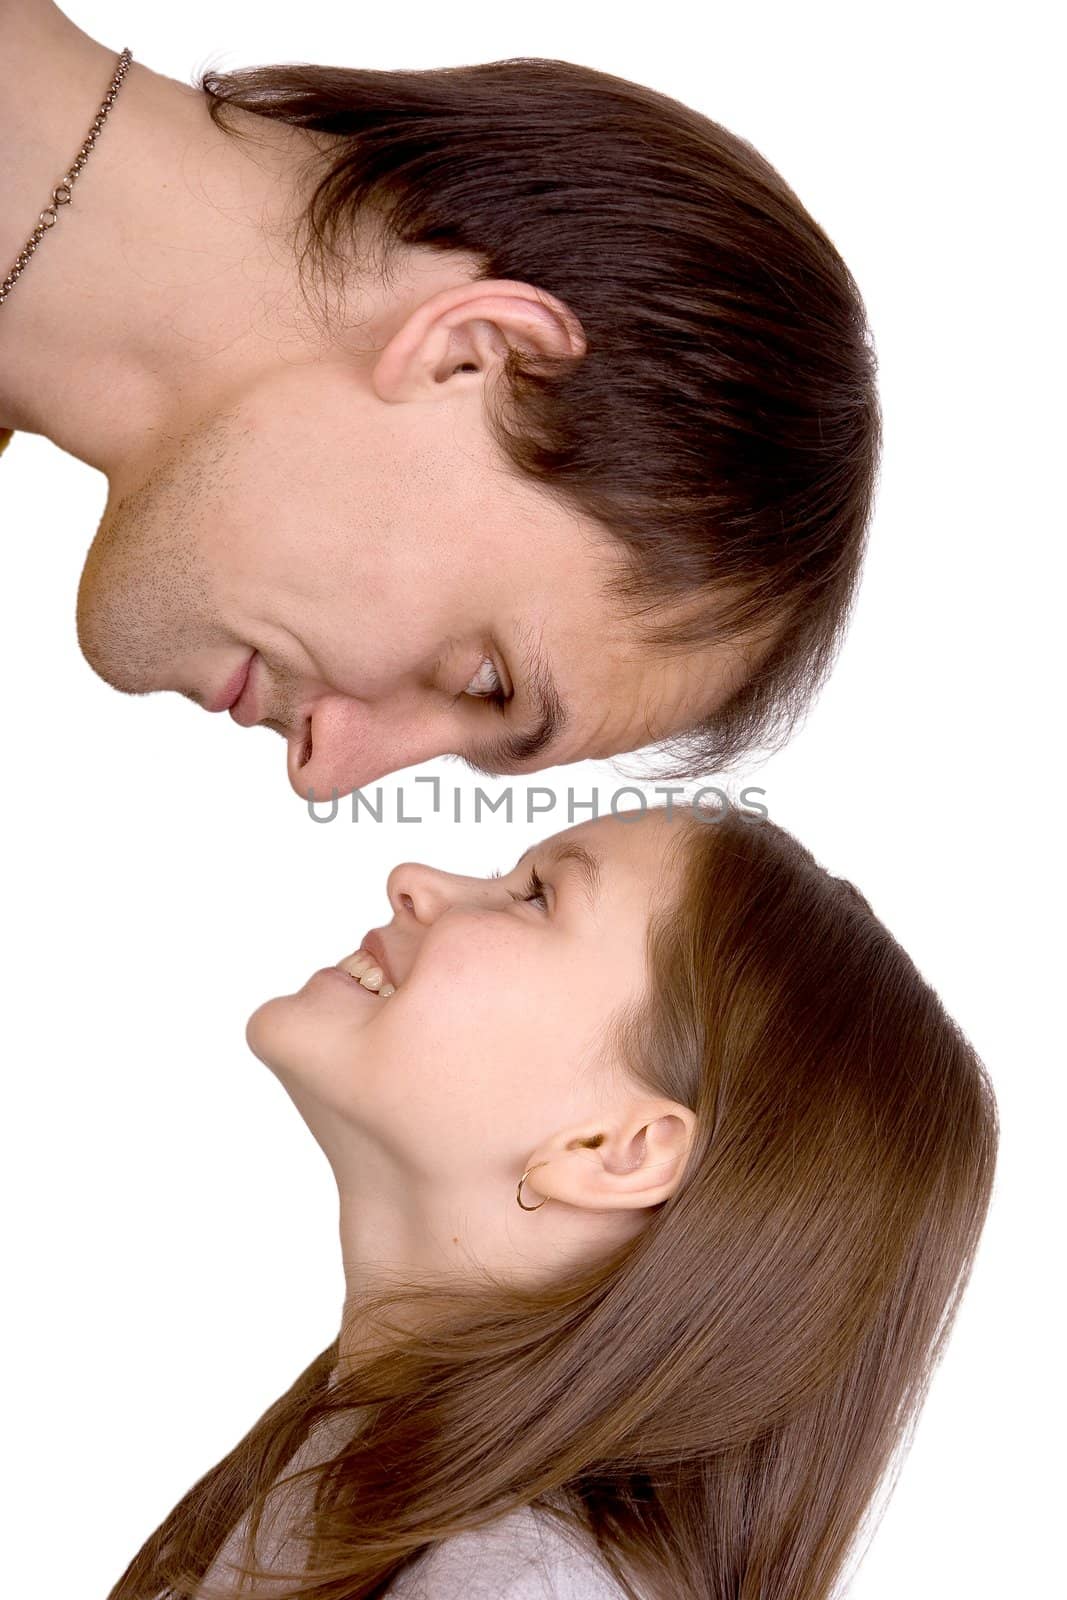 The man looks down on the girl on a white background